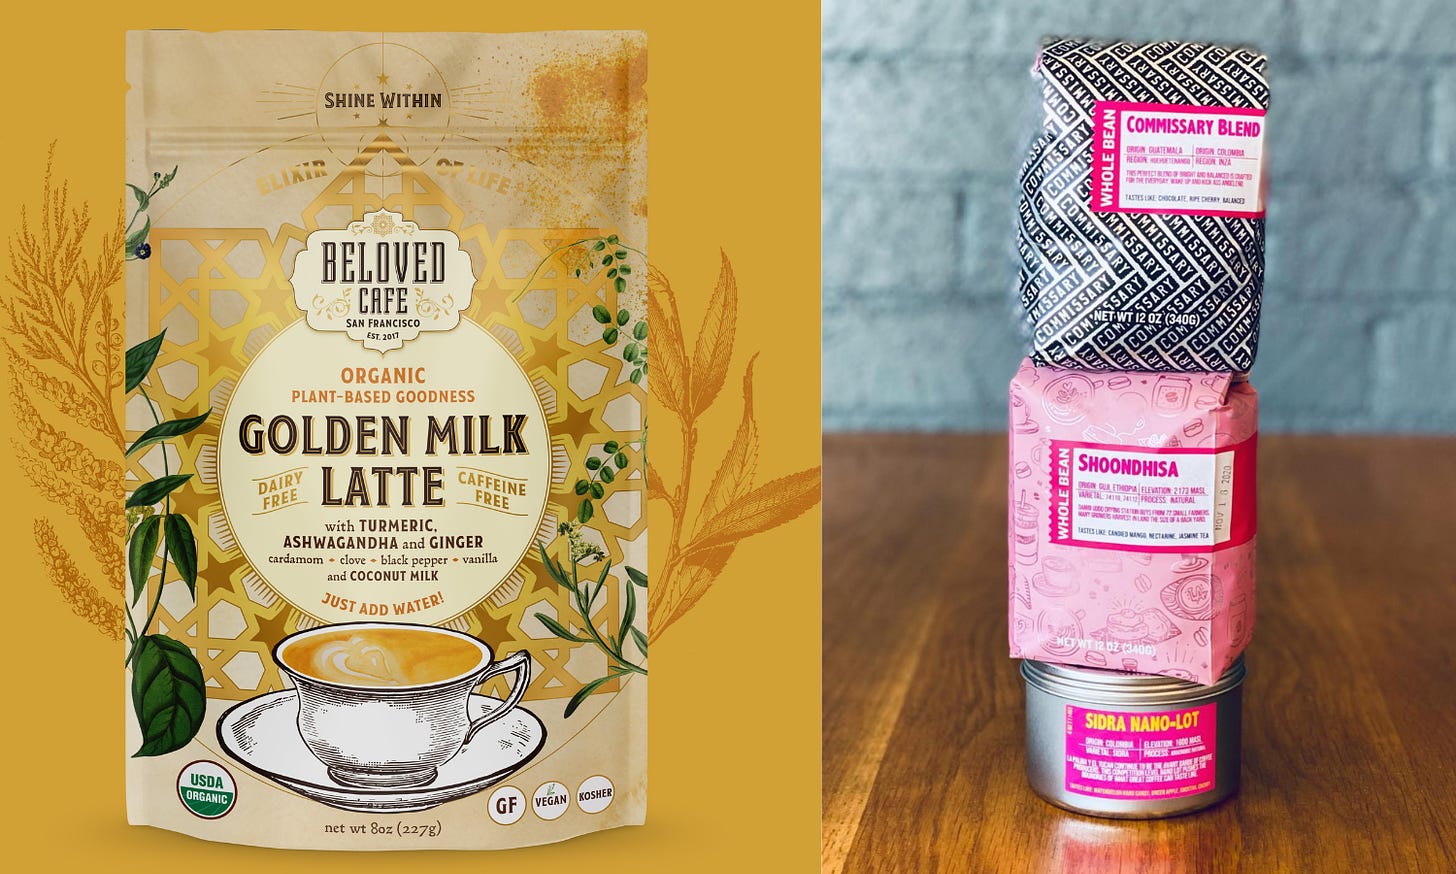 Left: Front view of a Golden Milk Latte zip-sealed package. Right: A stack of coffee packaging products in black and pink on wood table top.